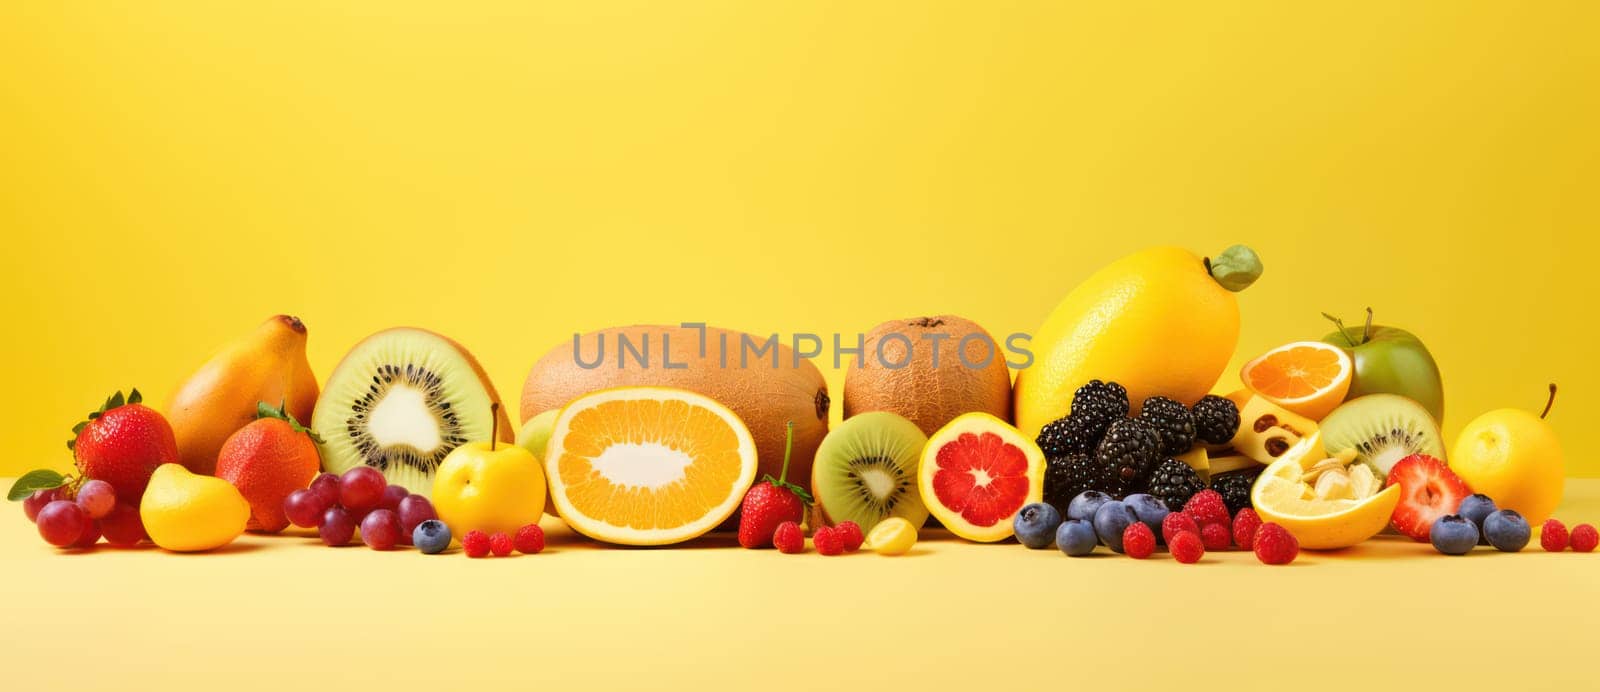 Colorful Tropical Fruit Salad: A Mouthwatering Melange of Fresh, Sweet, and Ripe Fruits on a Vibrantly Green Flat Background